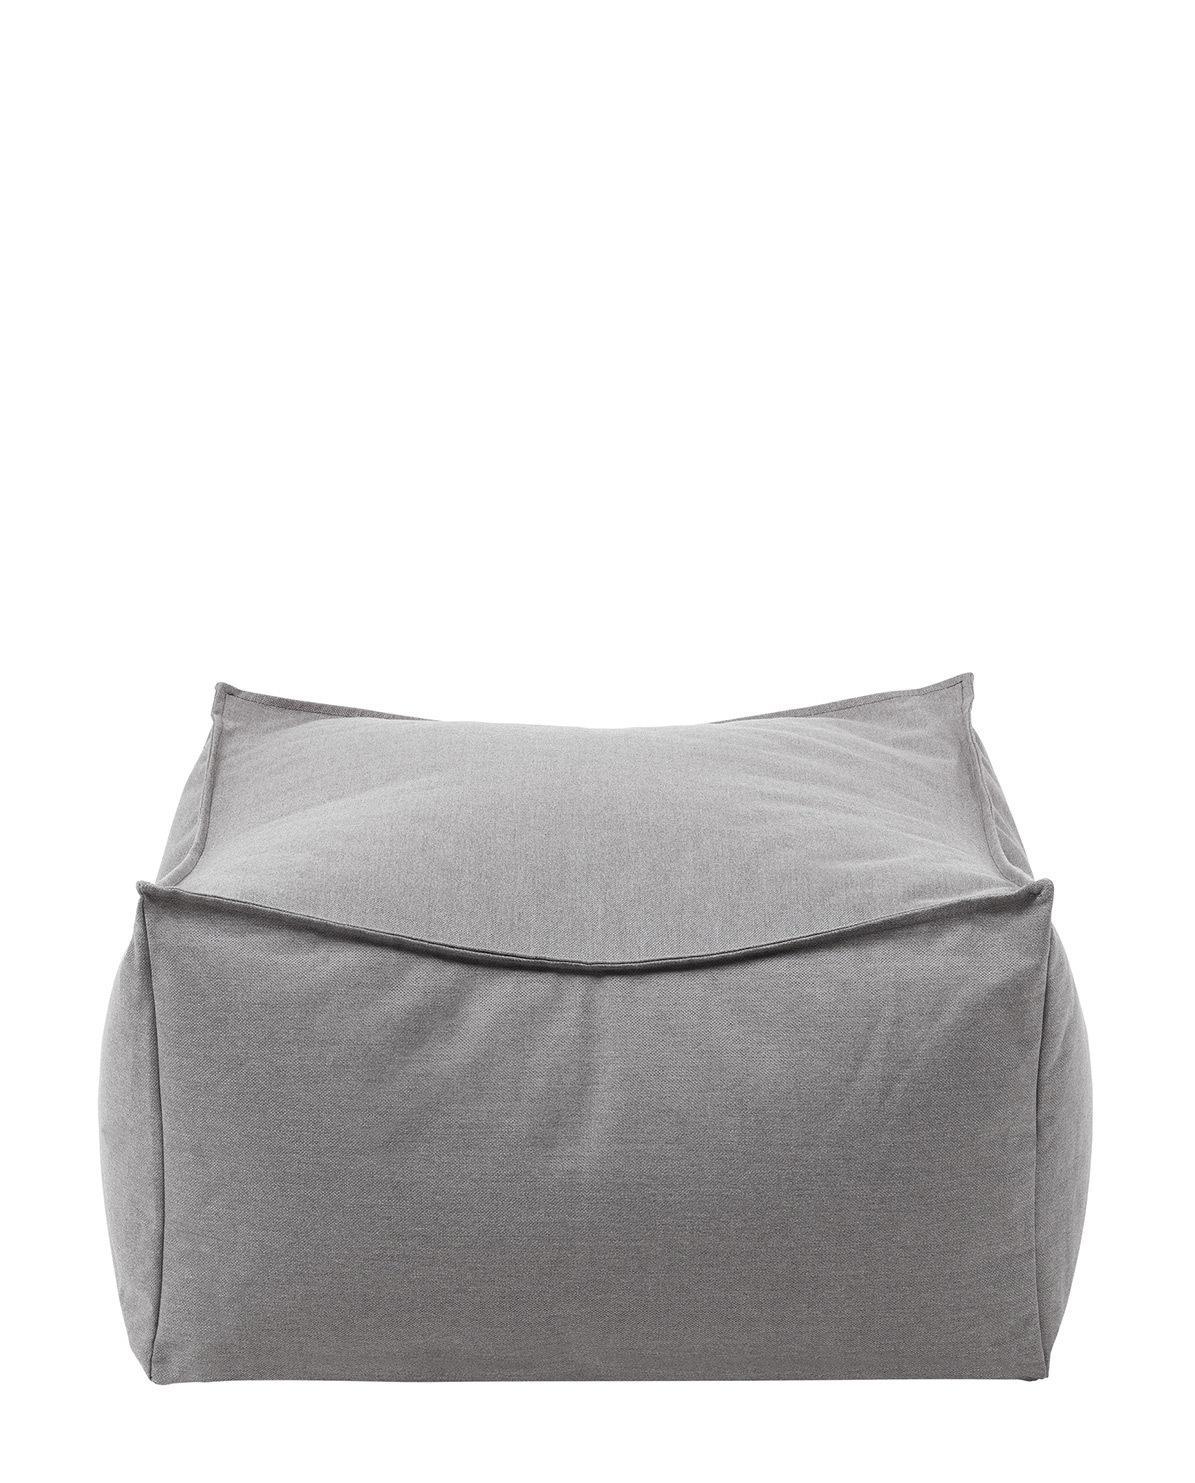 Pouf Stay Outdoor One Size